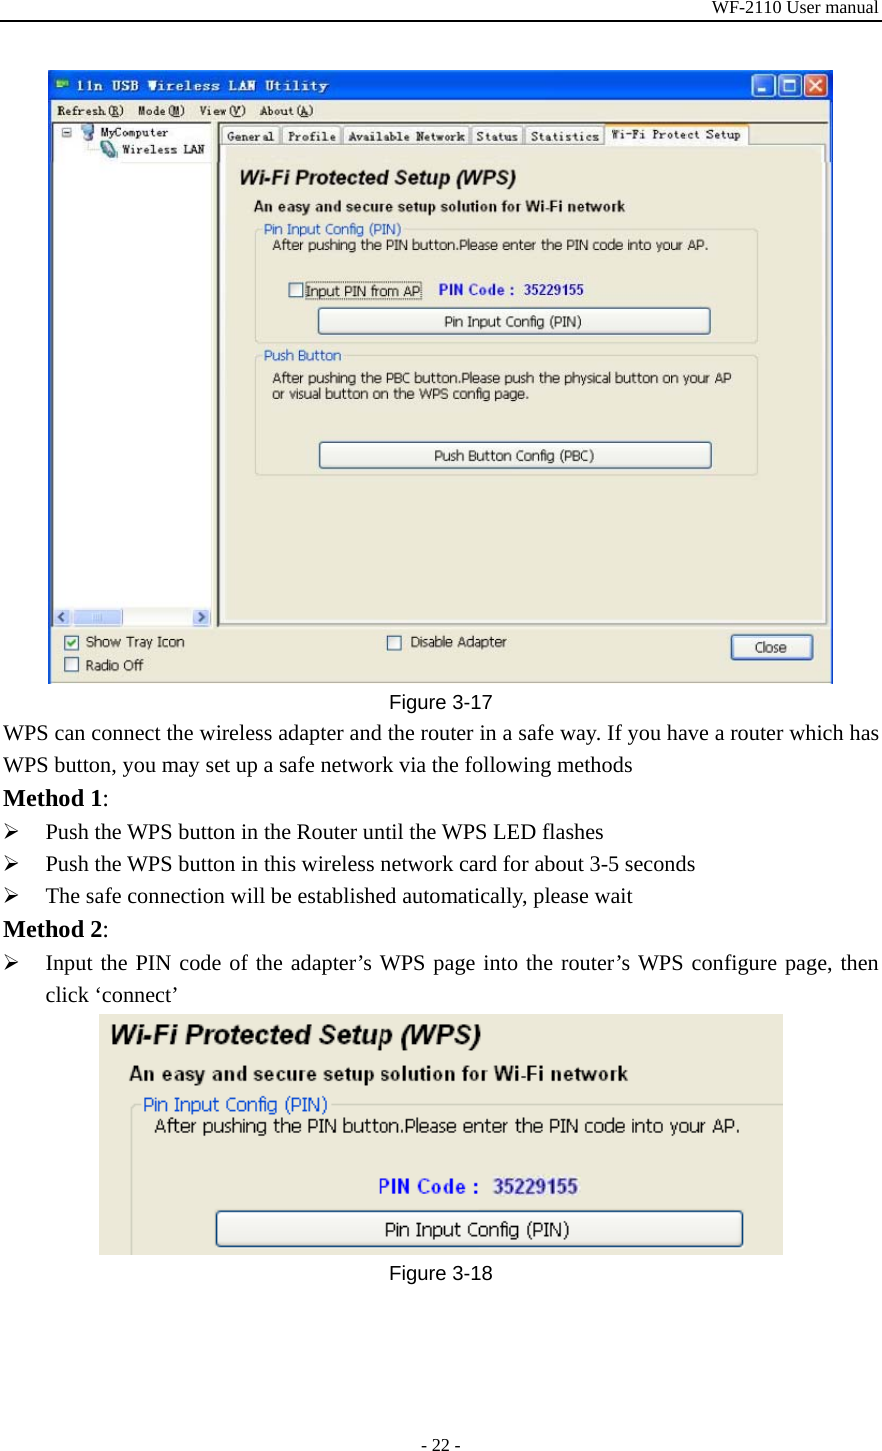 WF-2110 User manual - 22 -  Figure 3-17 WPS can connect the wireless adapter and the router in a safe way. If you have a router which has WPS button, you may set up a safe network via the following methods Method 1: ¾ Push the WPS button in the Router until the WPS LED flashes ¾ Push the WPS button in this wireless network card for about 3-5 seconds ¾ The safe connection will be established automatically, please wait Method 2: ¾ Input the PIN code of the adapter’s WPS page into the router’s WPS configure page, then click ‘connect’  Figure 3-18 